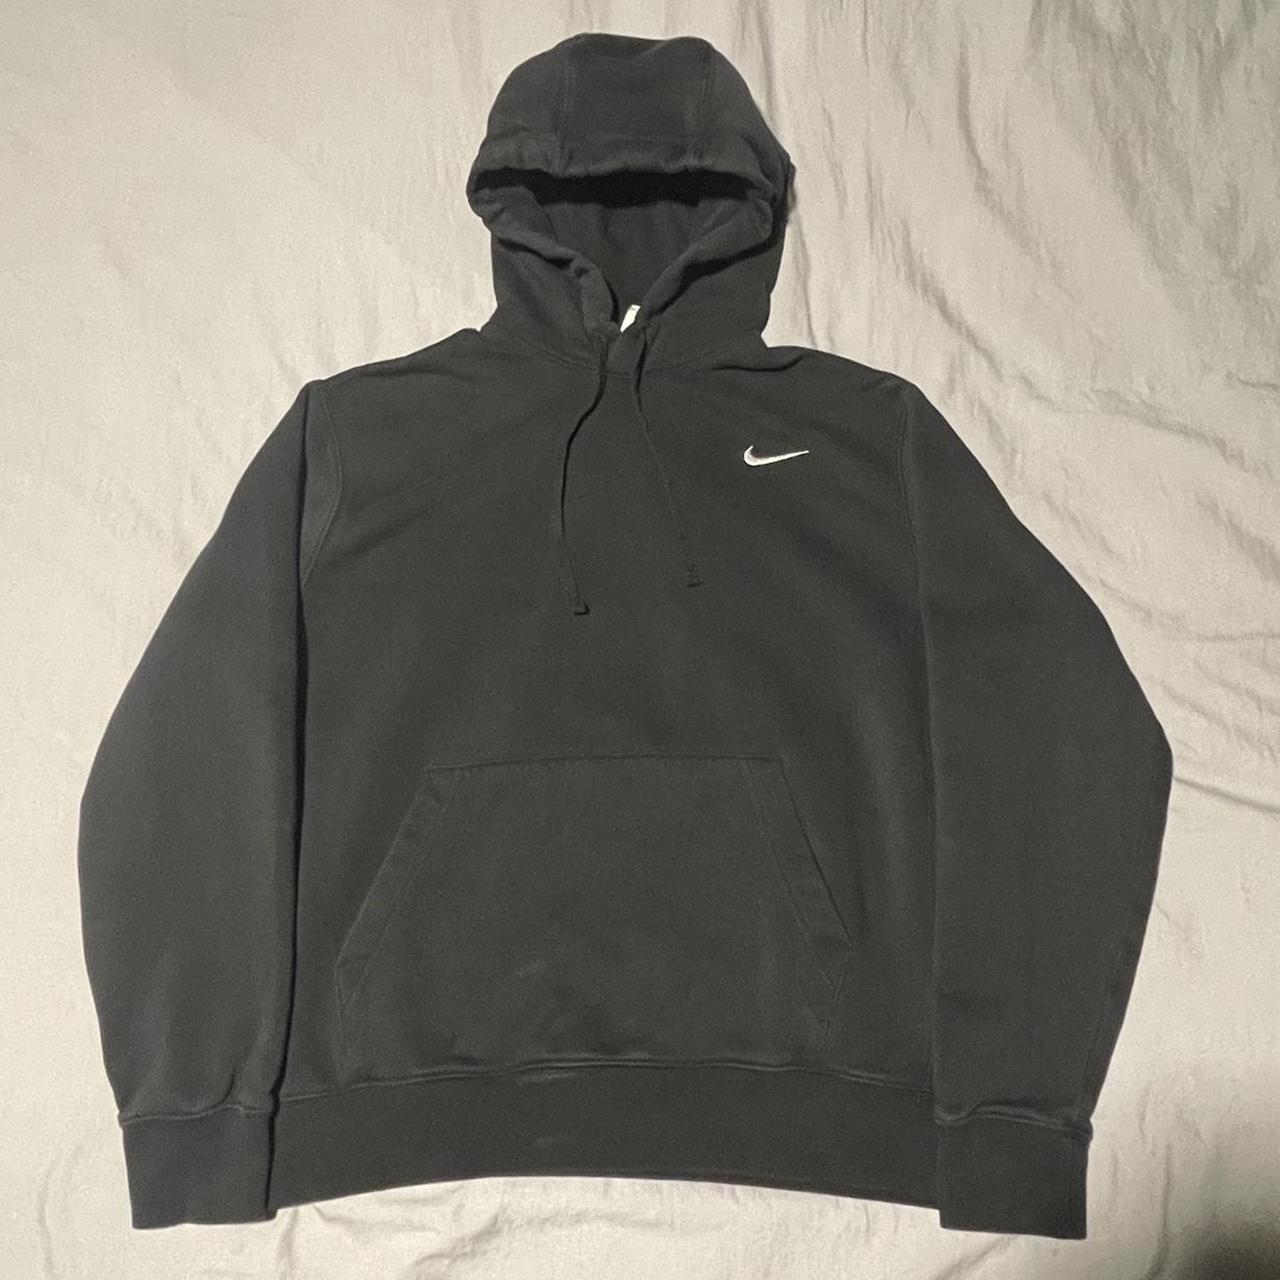 Black Nike Hoodie Excellent condition fits a... - Depop